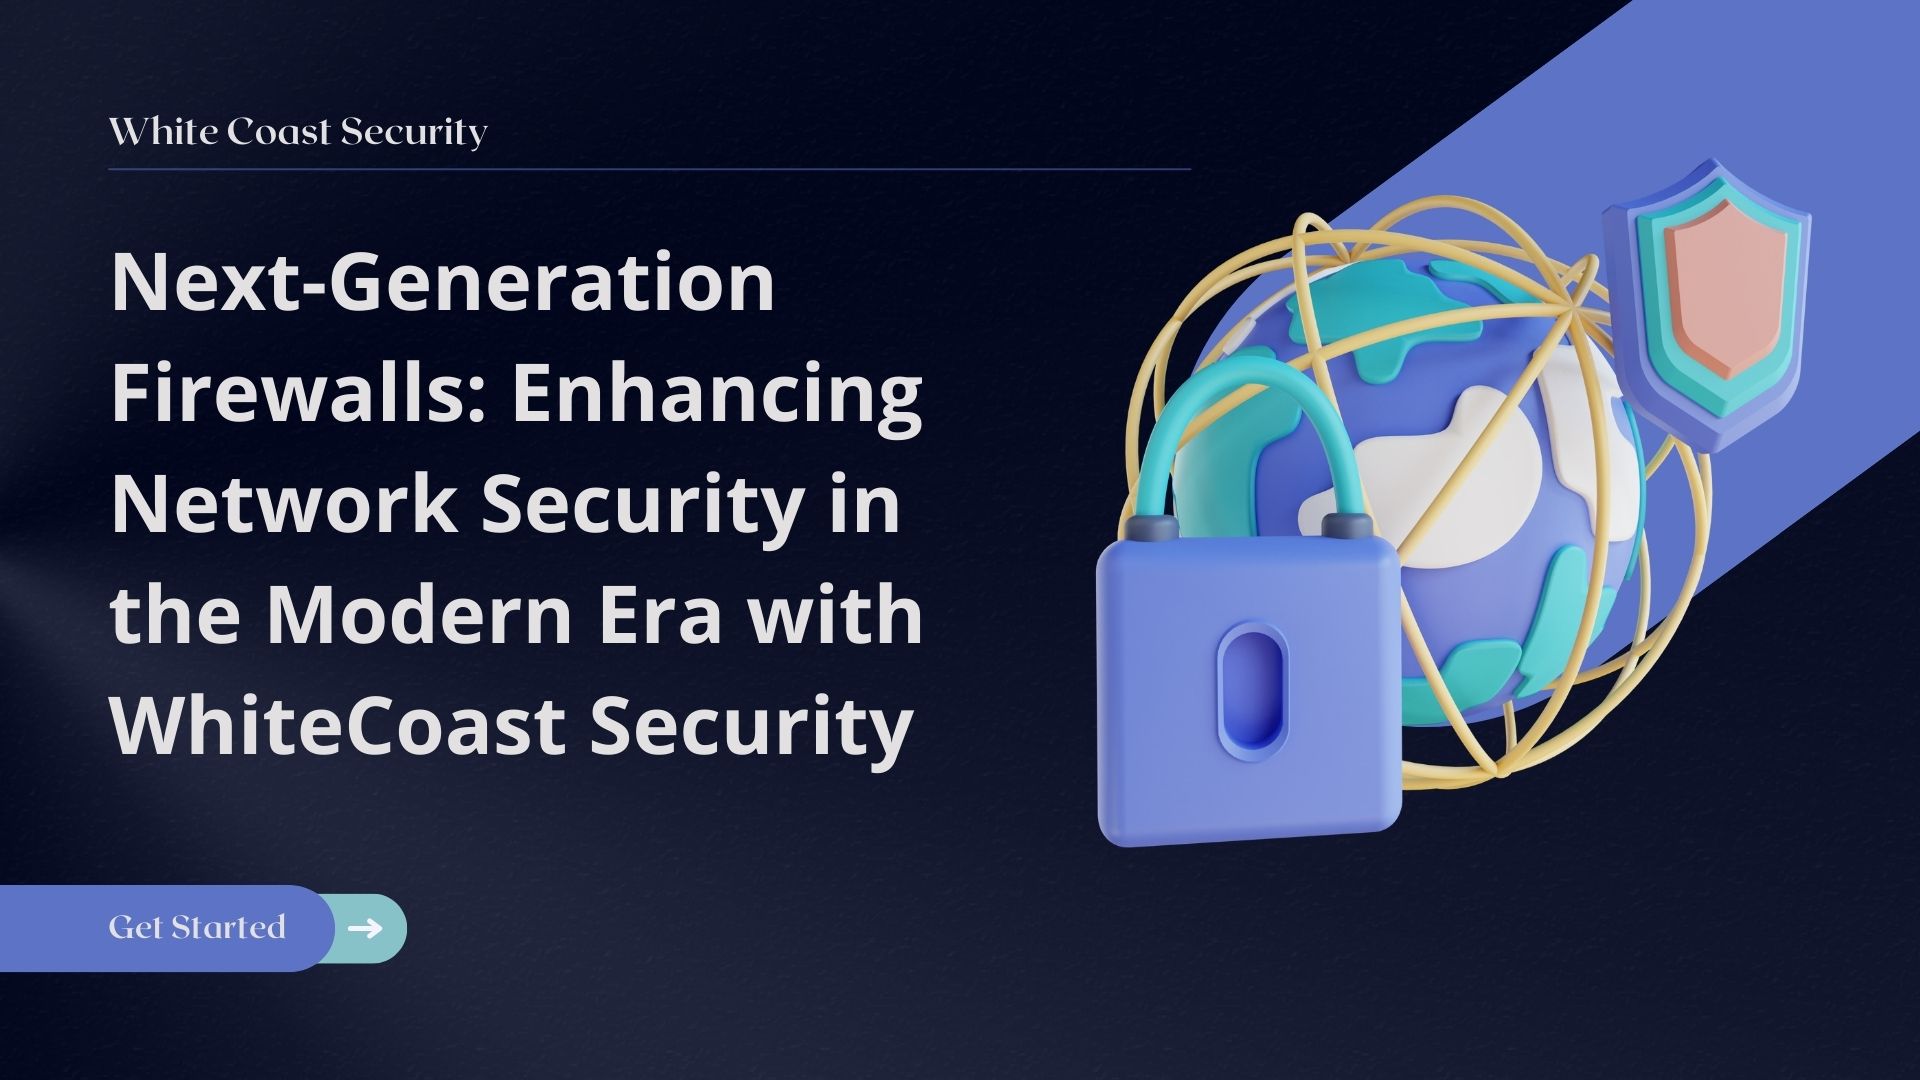 Next-Generation Firewalls: Enhancing Network Security in the Modern Era with WhiteCoast Security